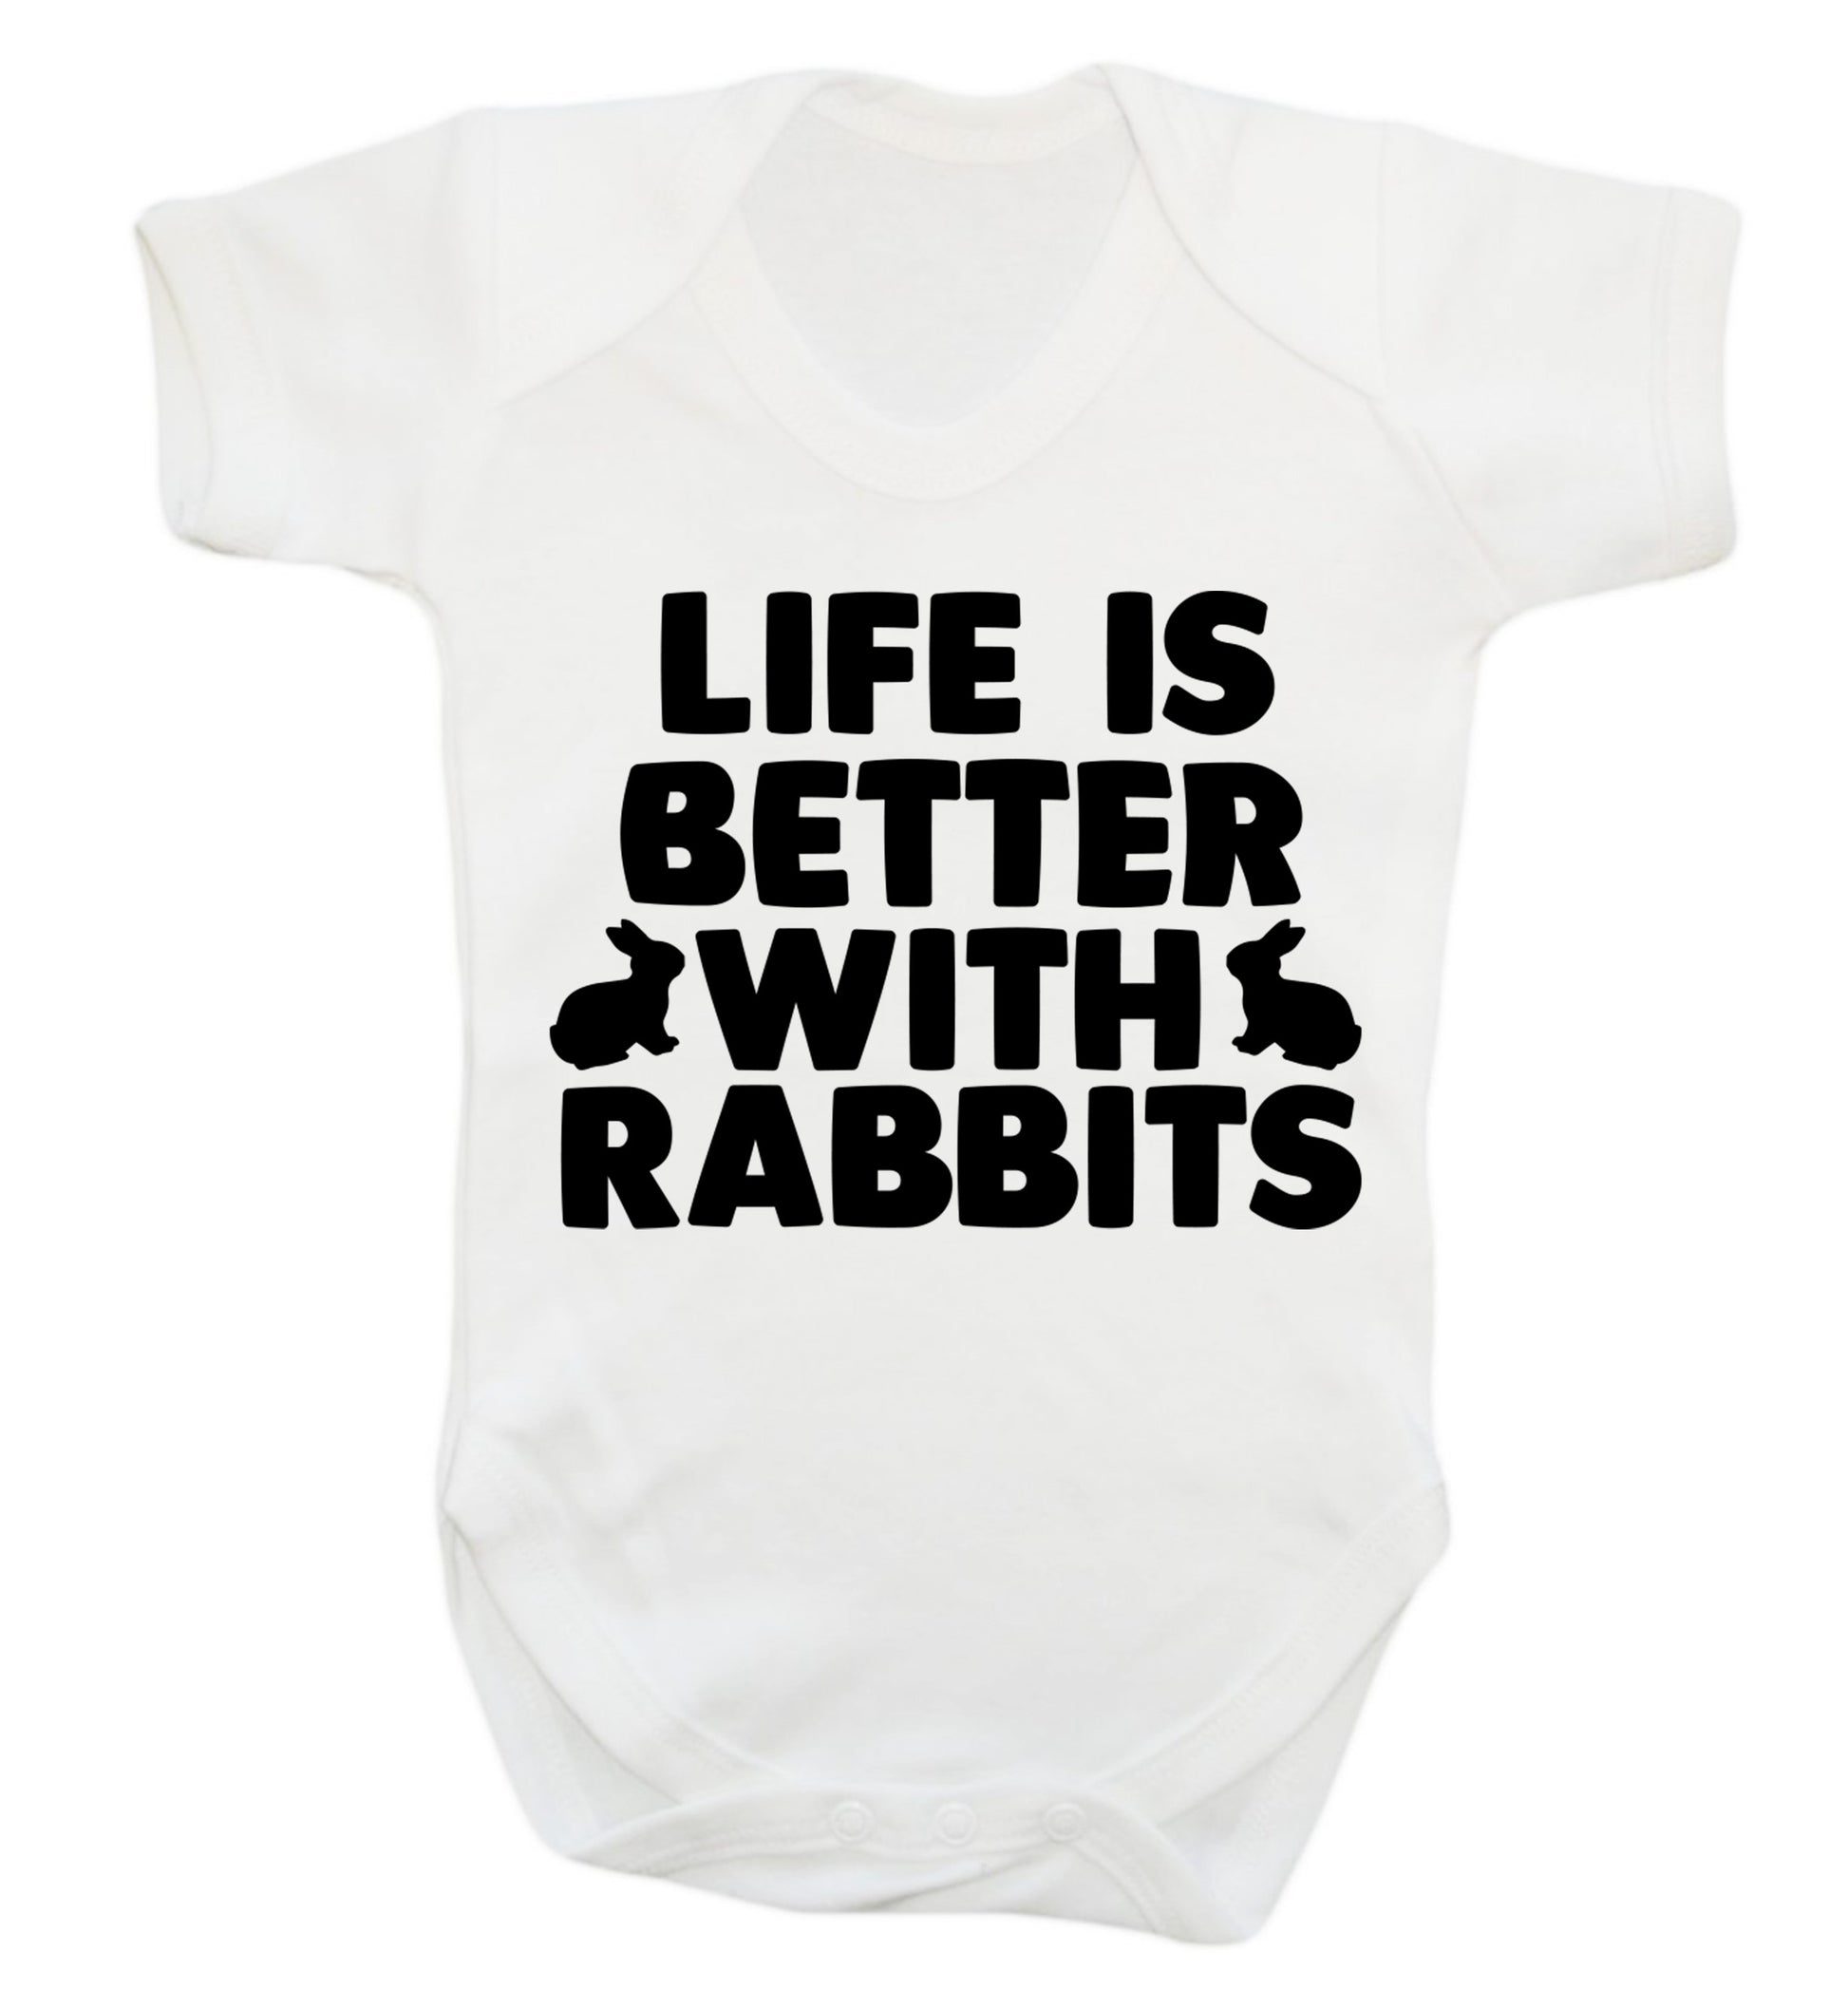 Life is better with rabbits Baby Vest white 18-24 months